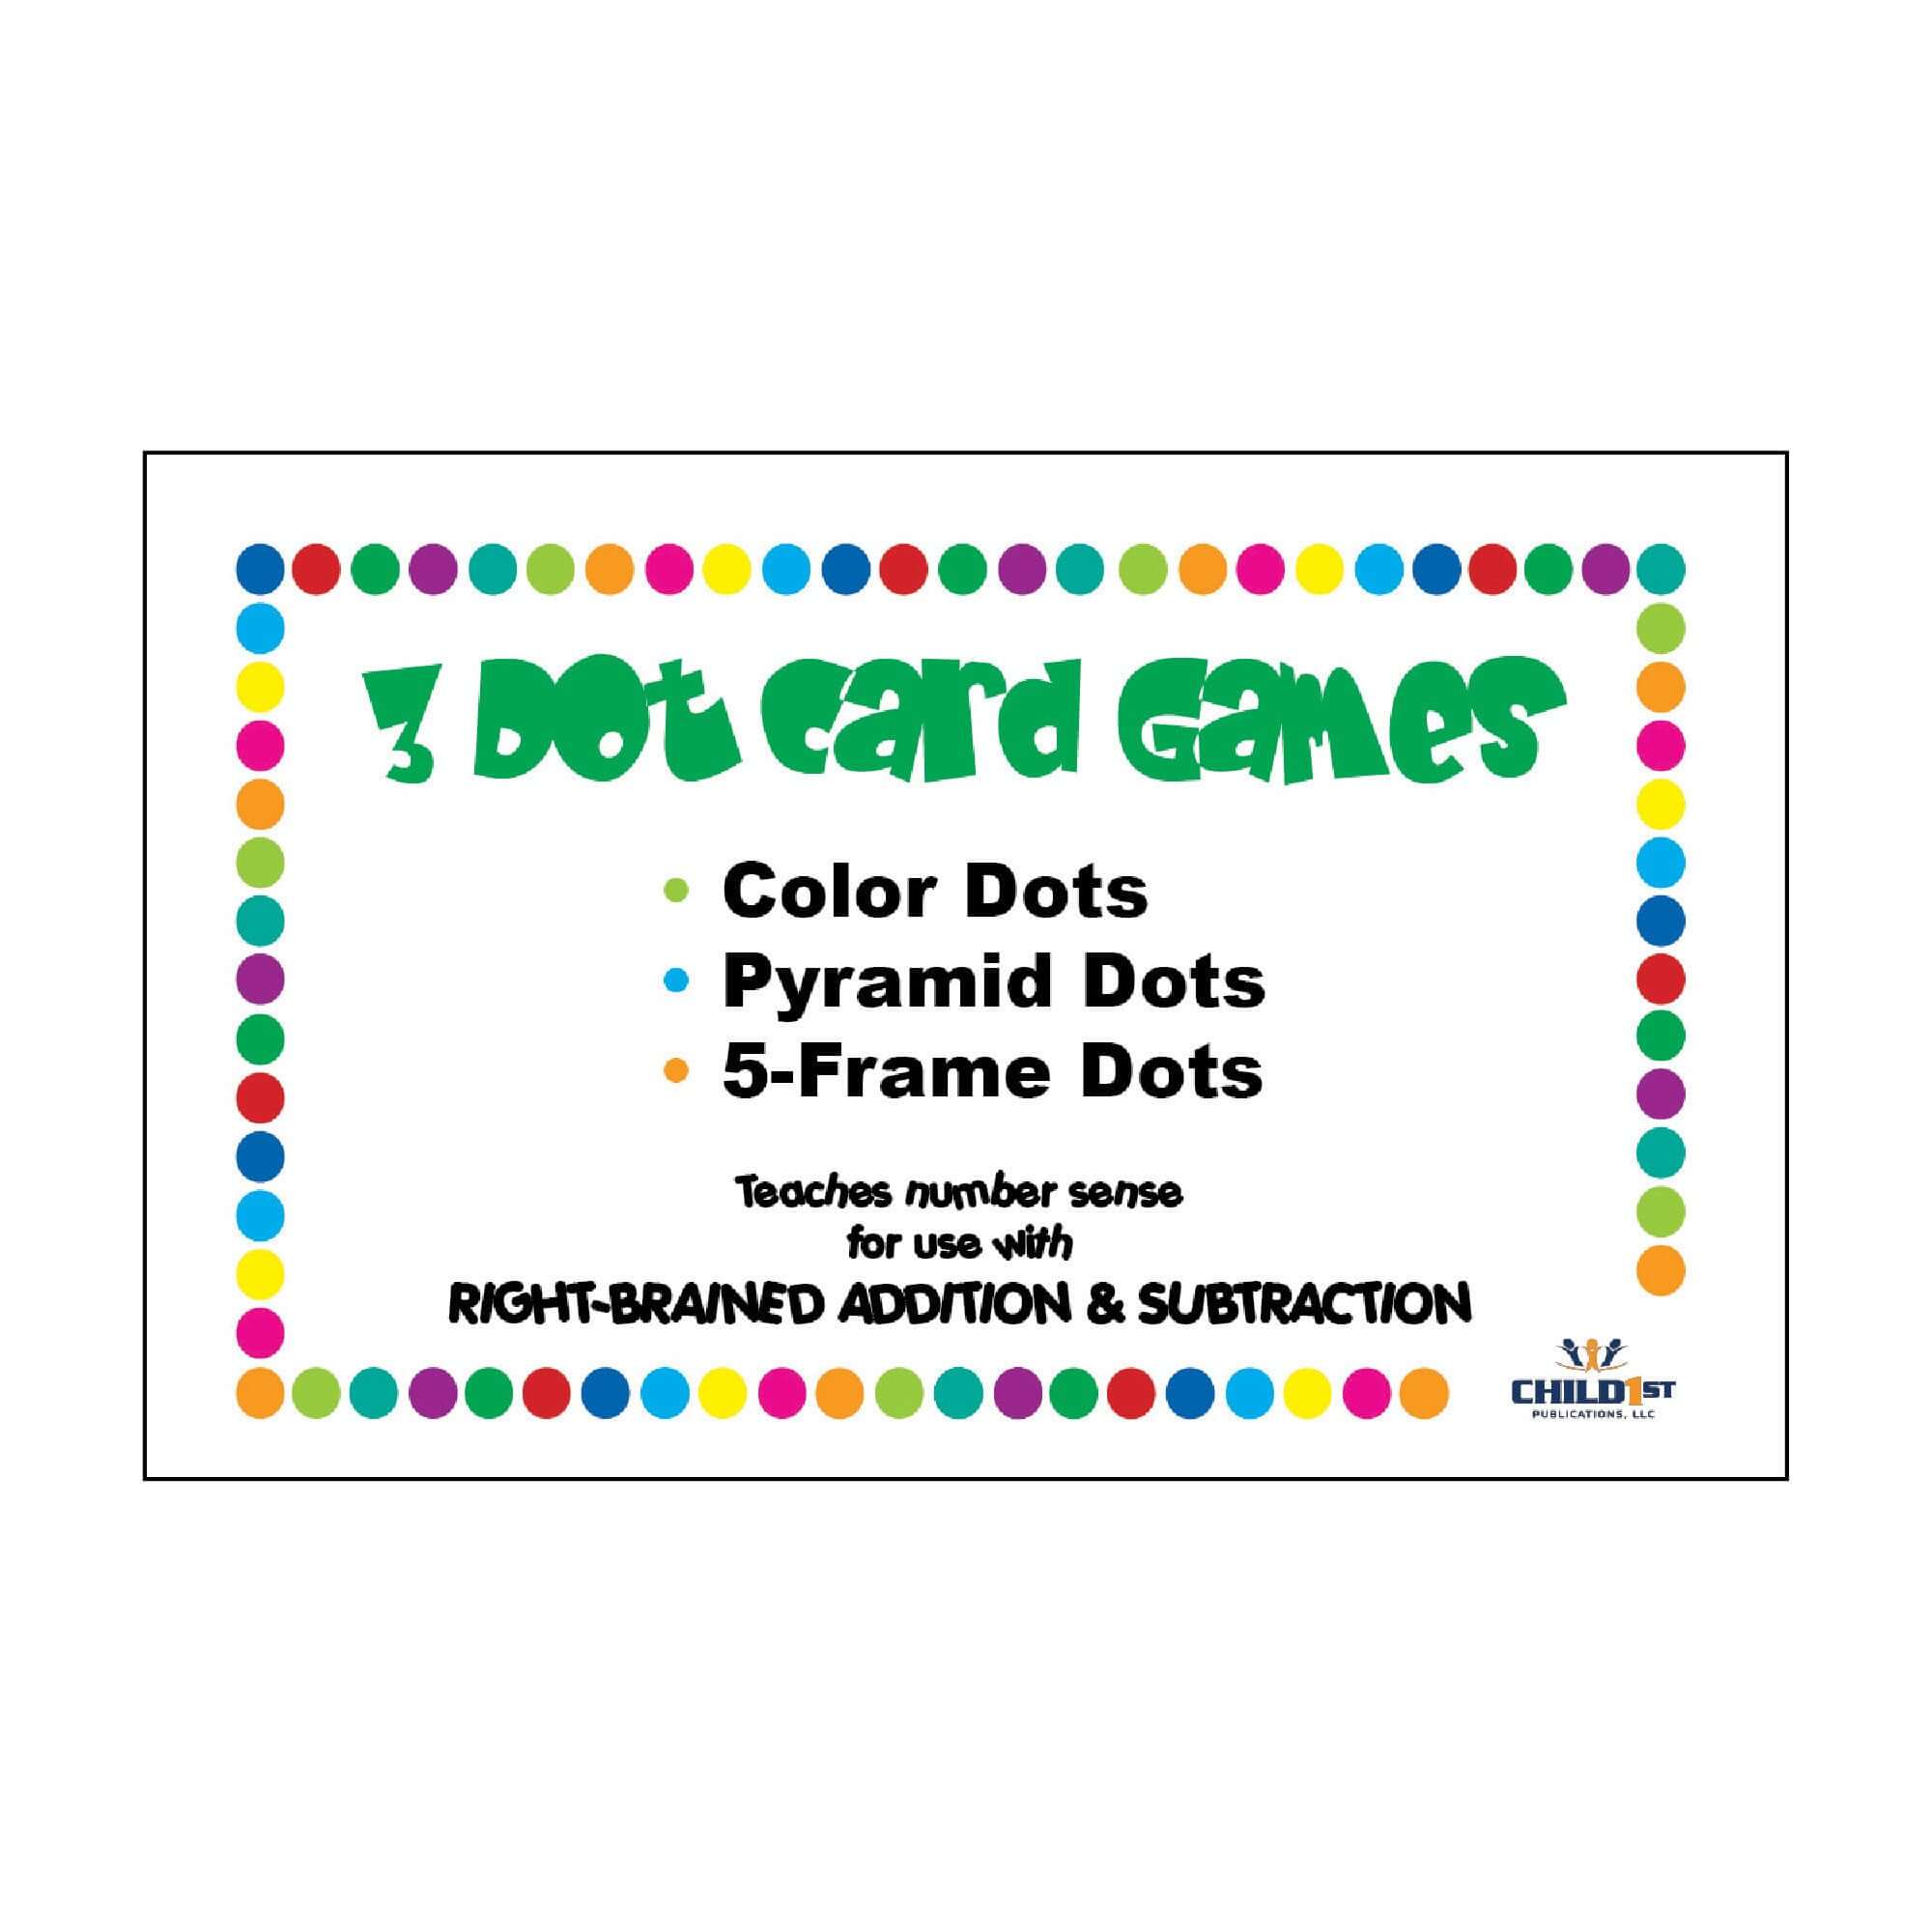 Right-Brained Addition & Subtraction Dot Cards